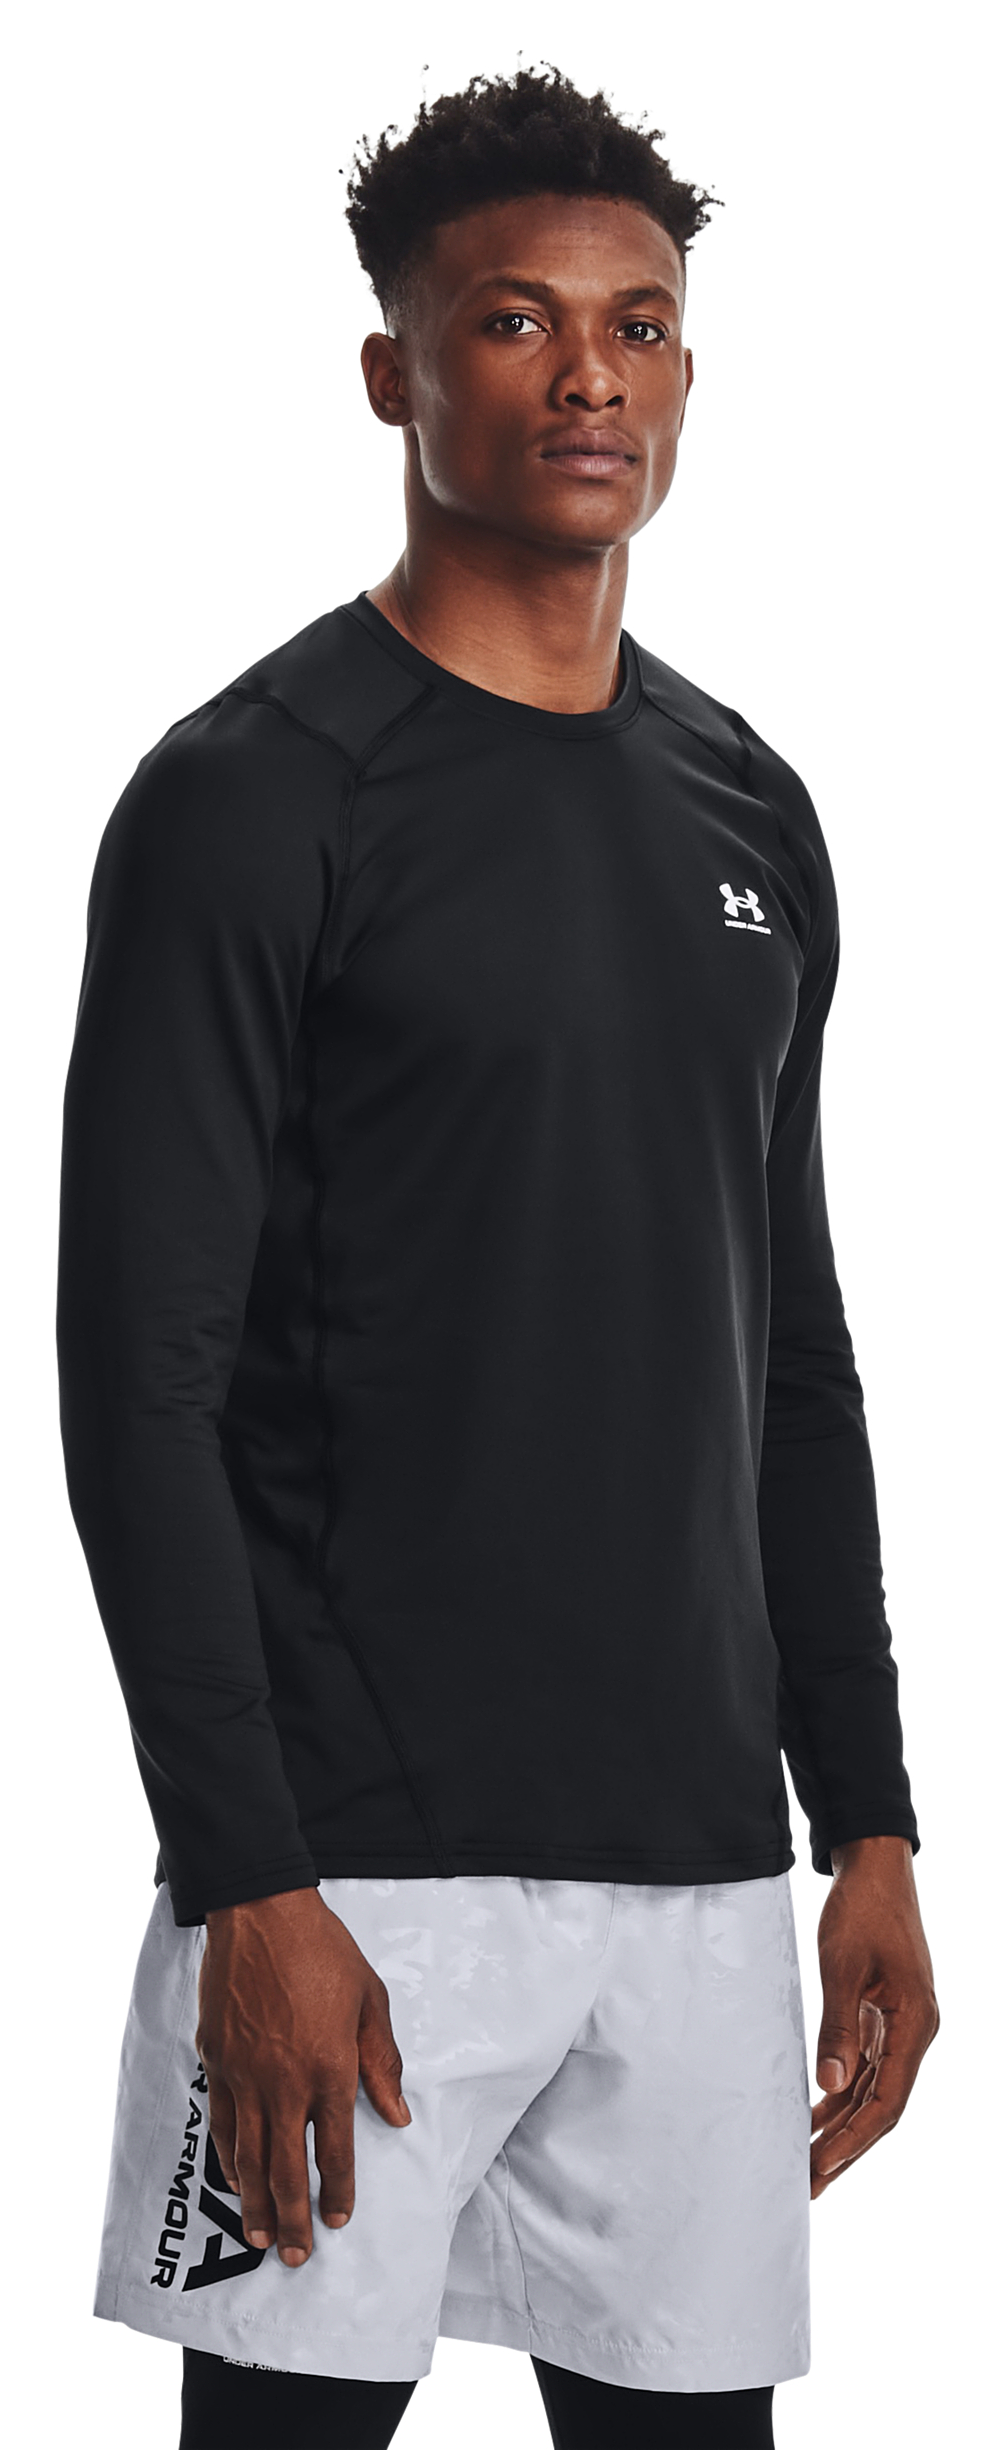 Under Armour ColdGear Fitted Long-Sleeve Crew for Men - Black/White - 3XLT